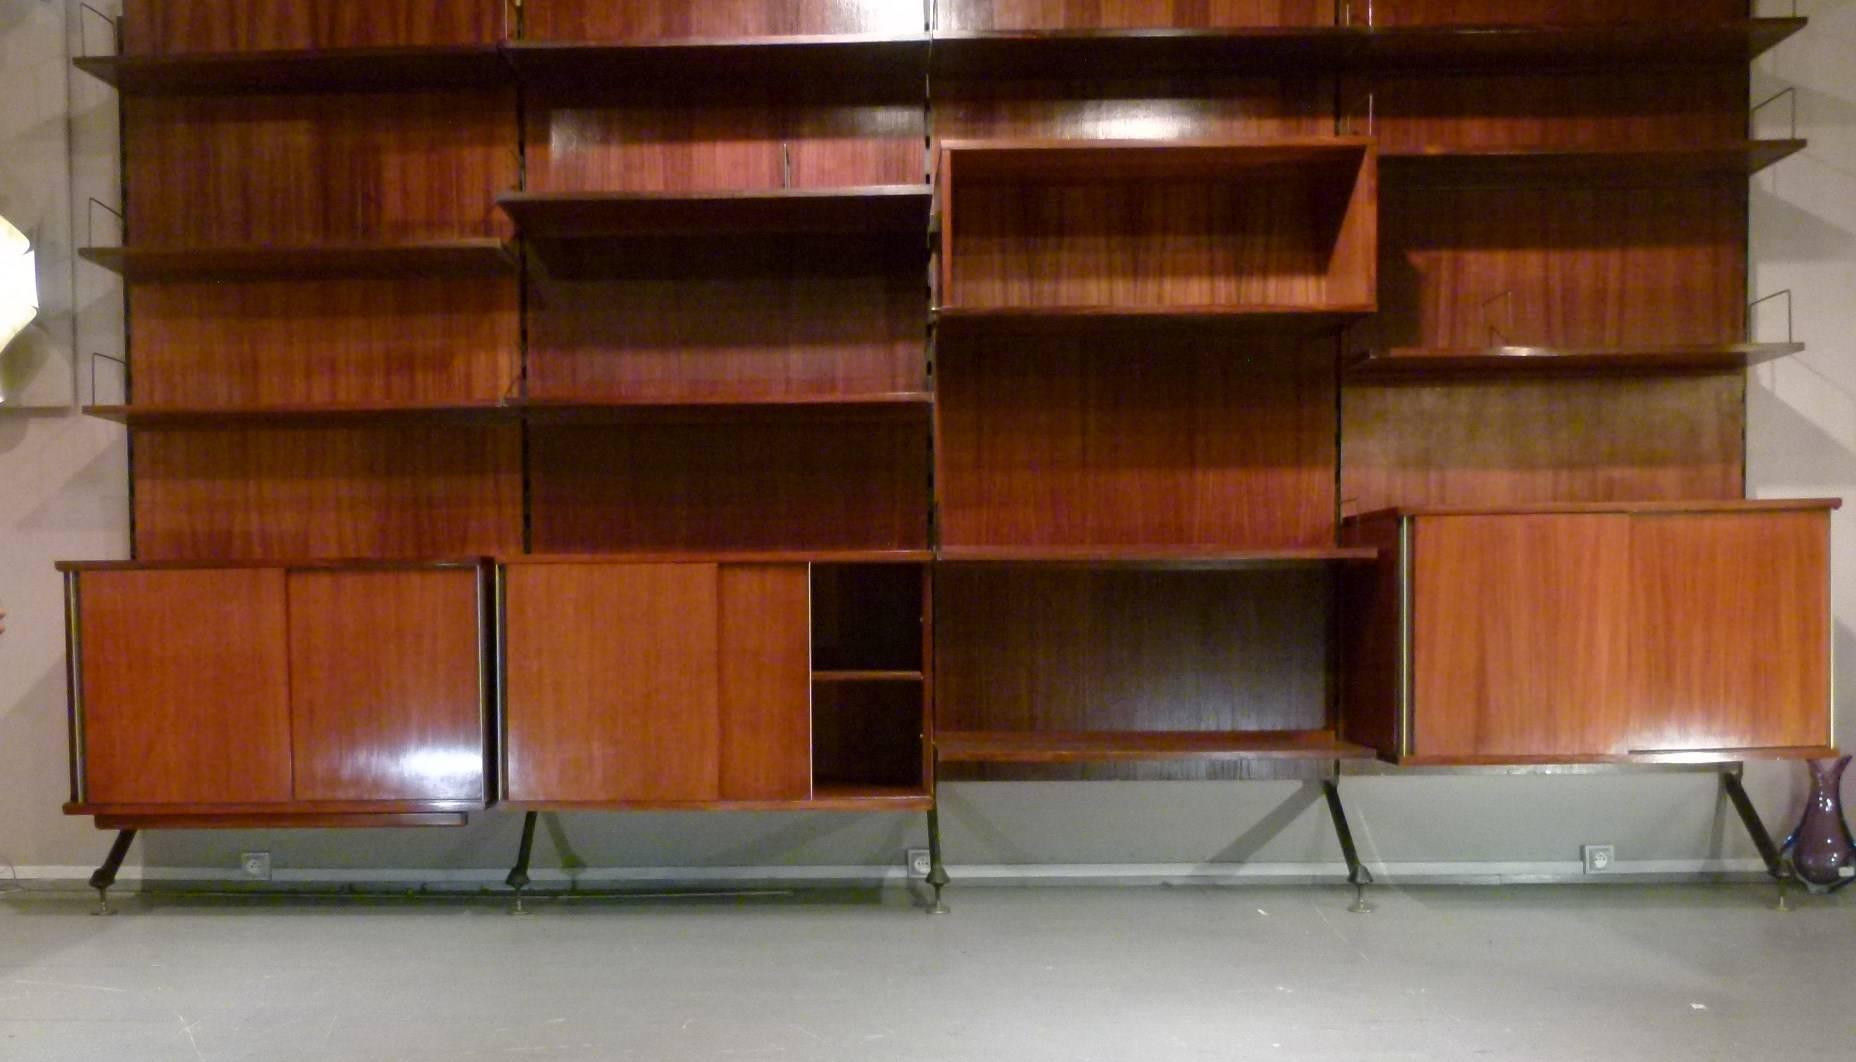 Rosewood and metal bookcase composed of four rosewood pedestals with bookshelves and bookends.
The boxes open with two sliding doors on a row of shelves.
Each box measures 95 cm wide with a total of 380 cm.
The bookcase is mounted on metal racks